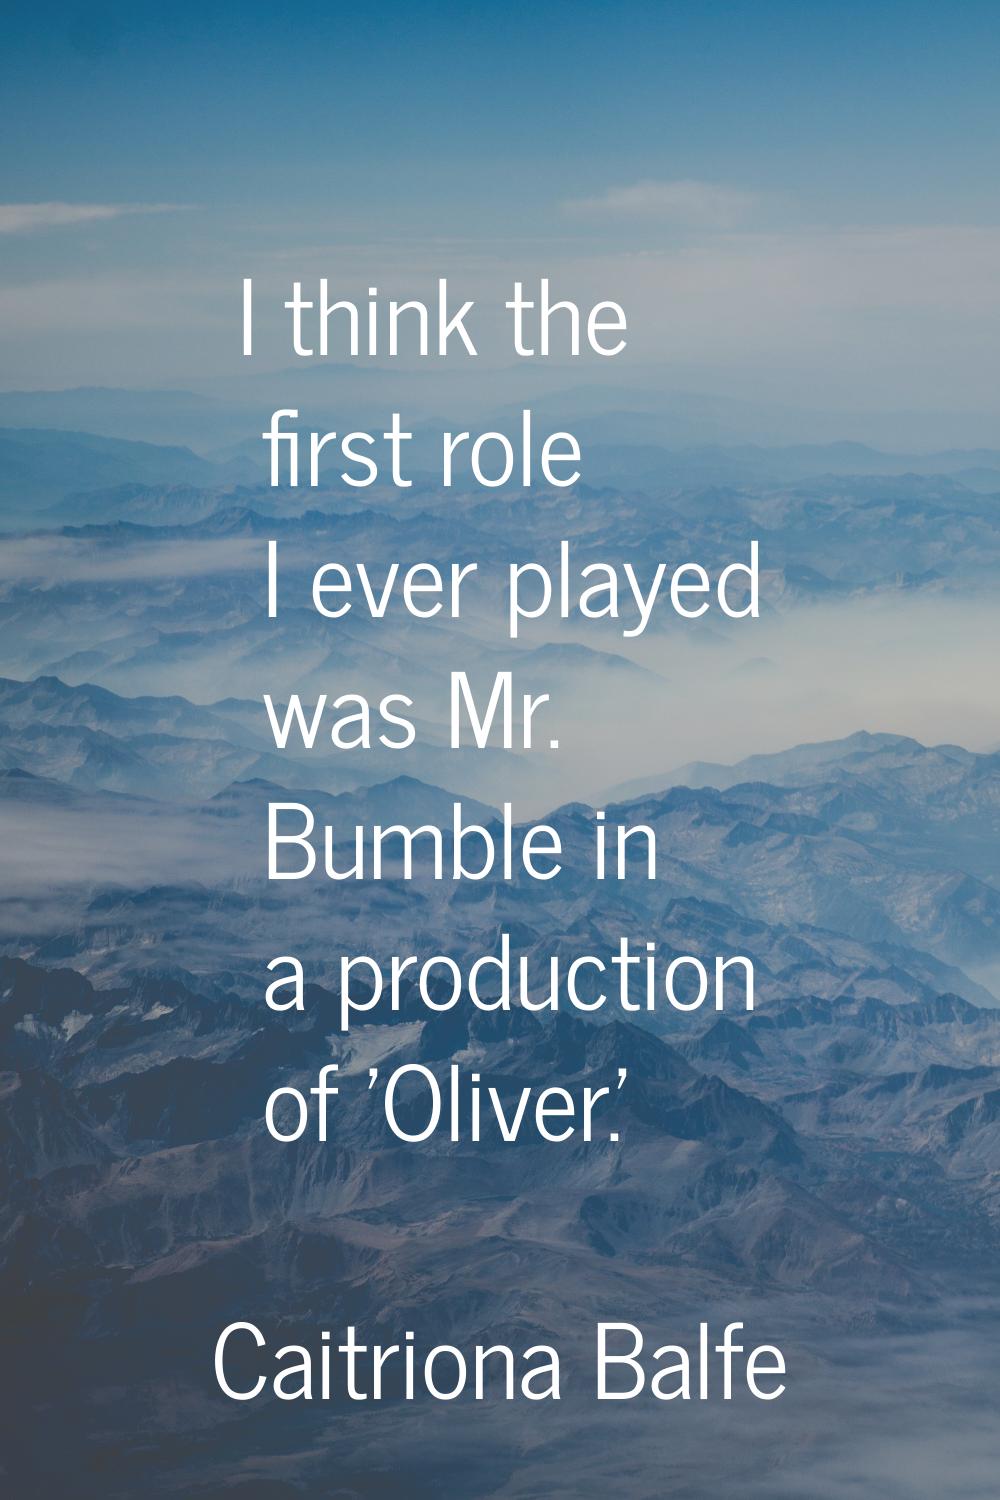 I think the first role I ever played was Mr. Bumble in a production of 'Oliver.'